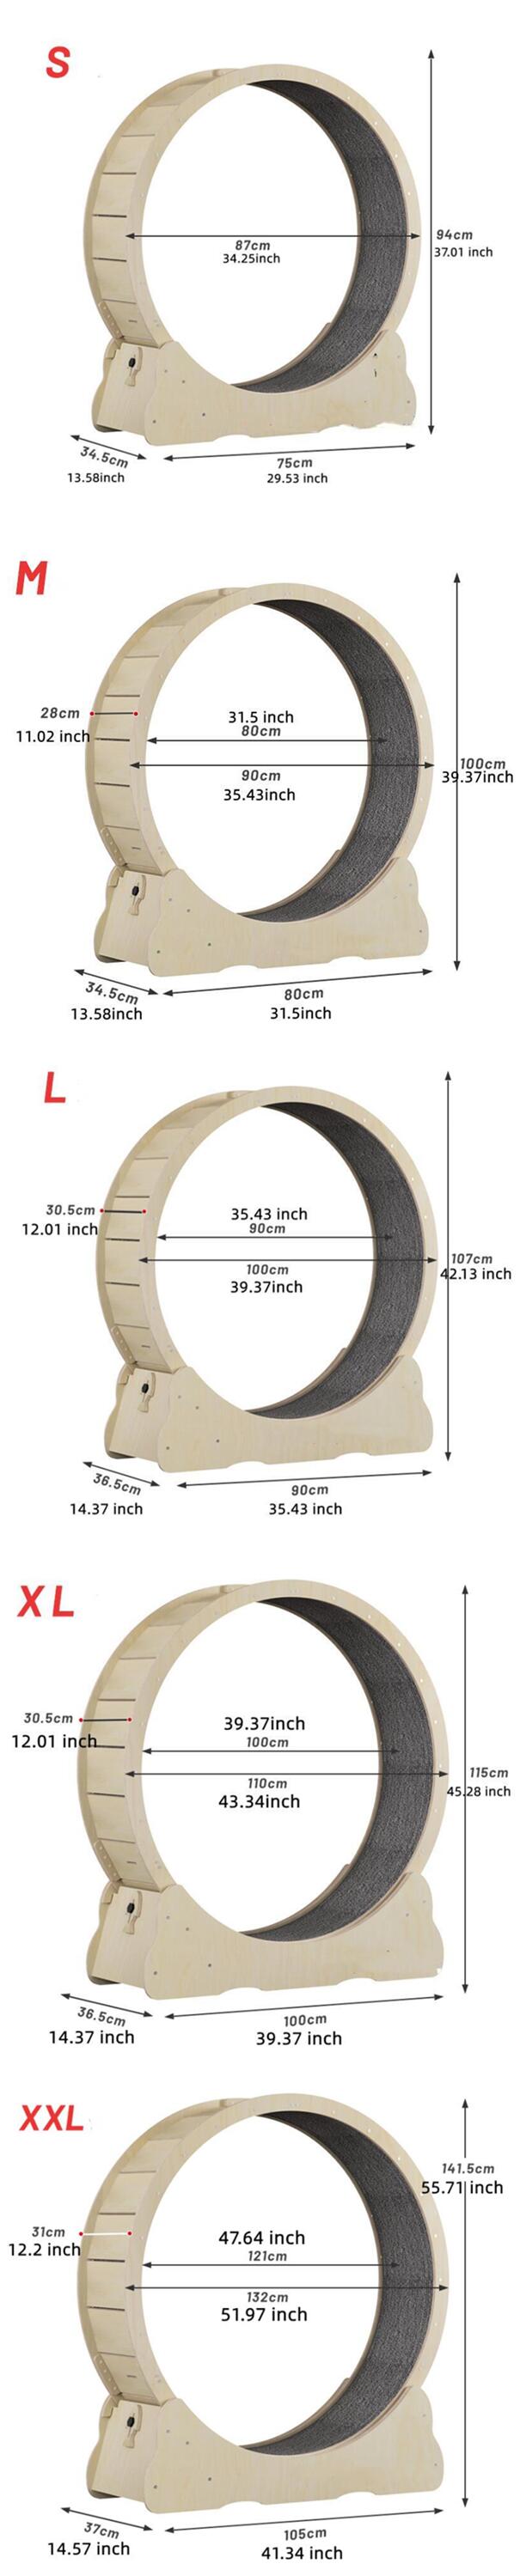 CAT WHEEL TREADMILL PLAY WHEEL WITH SAFETY LATCH MECHANISM WEIGHT LOSS AND DAILY EXERICSE - HIGH QUALITY - SILENT TURNING  SIZE AVAILABLE  SMALL - XXL (JUMBO) - 5 COLORS AVAILABLE  (FREE SHIPMENT) (SOLID WOOD)